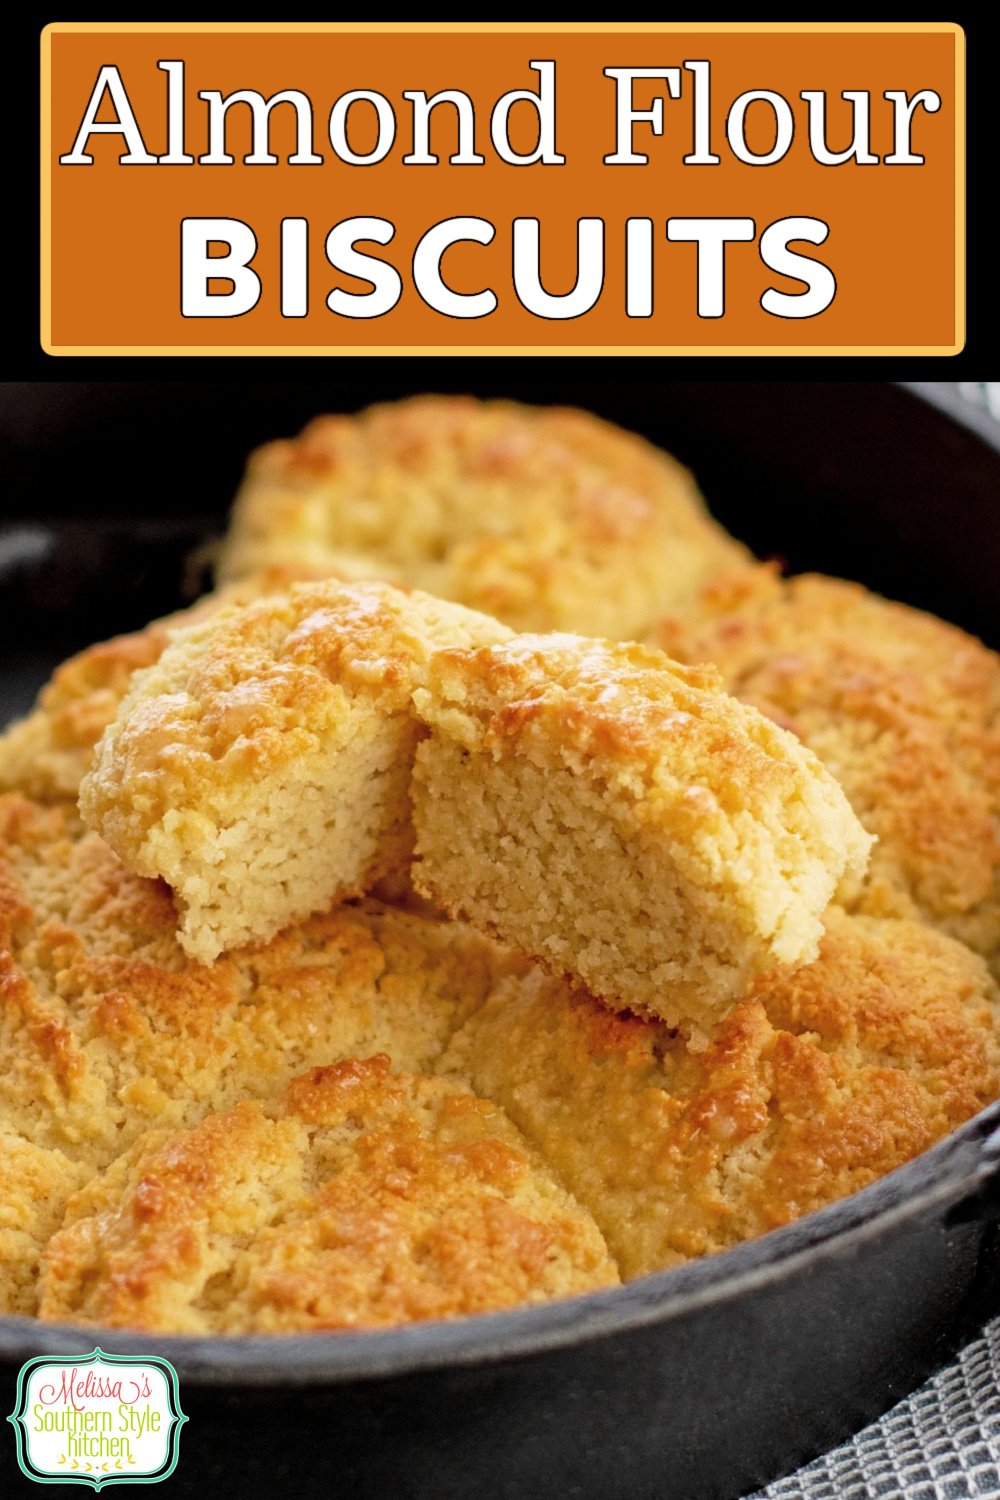 These buttery Almond Flour Biscuits can be enjoyed at any meal with butter and jam, stuffed with ham and eggs or for breakfast and brunch #almondflourbiscuits #biscuits #southernbuttermilkbiscuits #bestbiscuitrecipes #southernrecipes #homemadebiscuits #breadrecipes #glutenfreebiscuits #ketobiscuits #glutenfreerecipes via @melissasssk